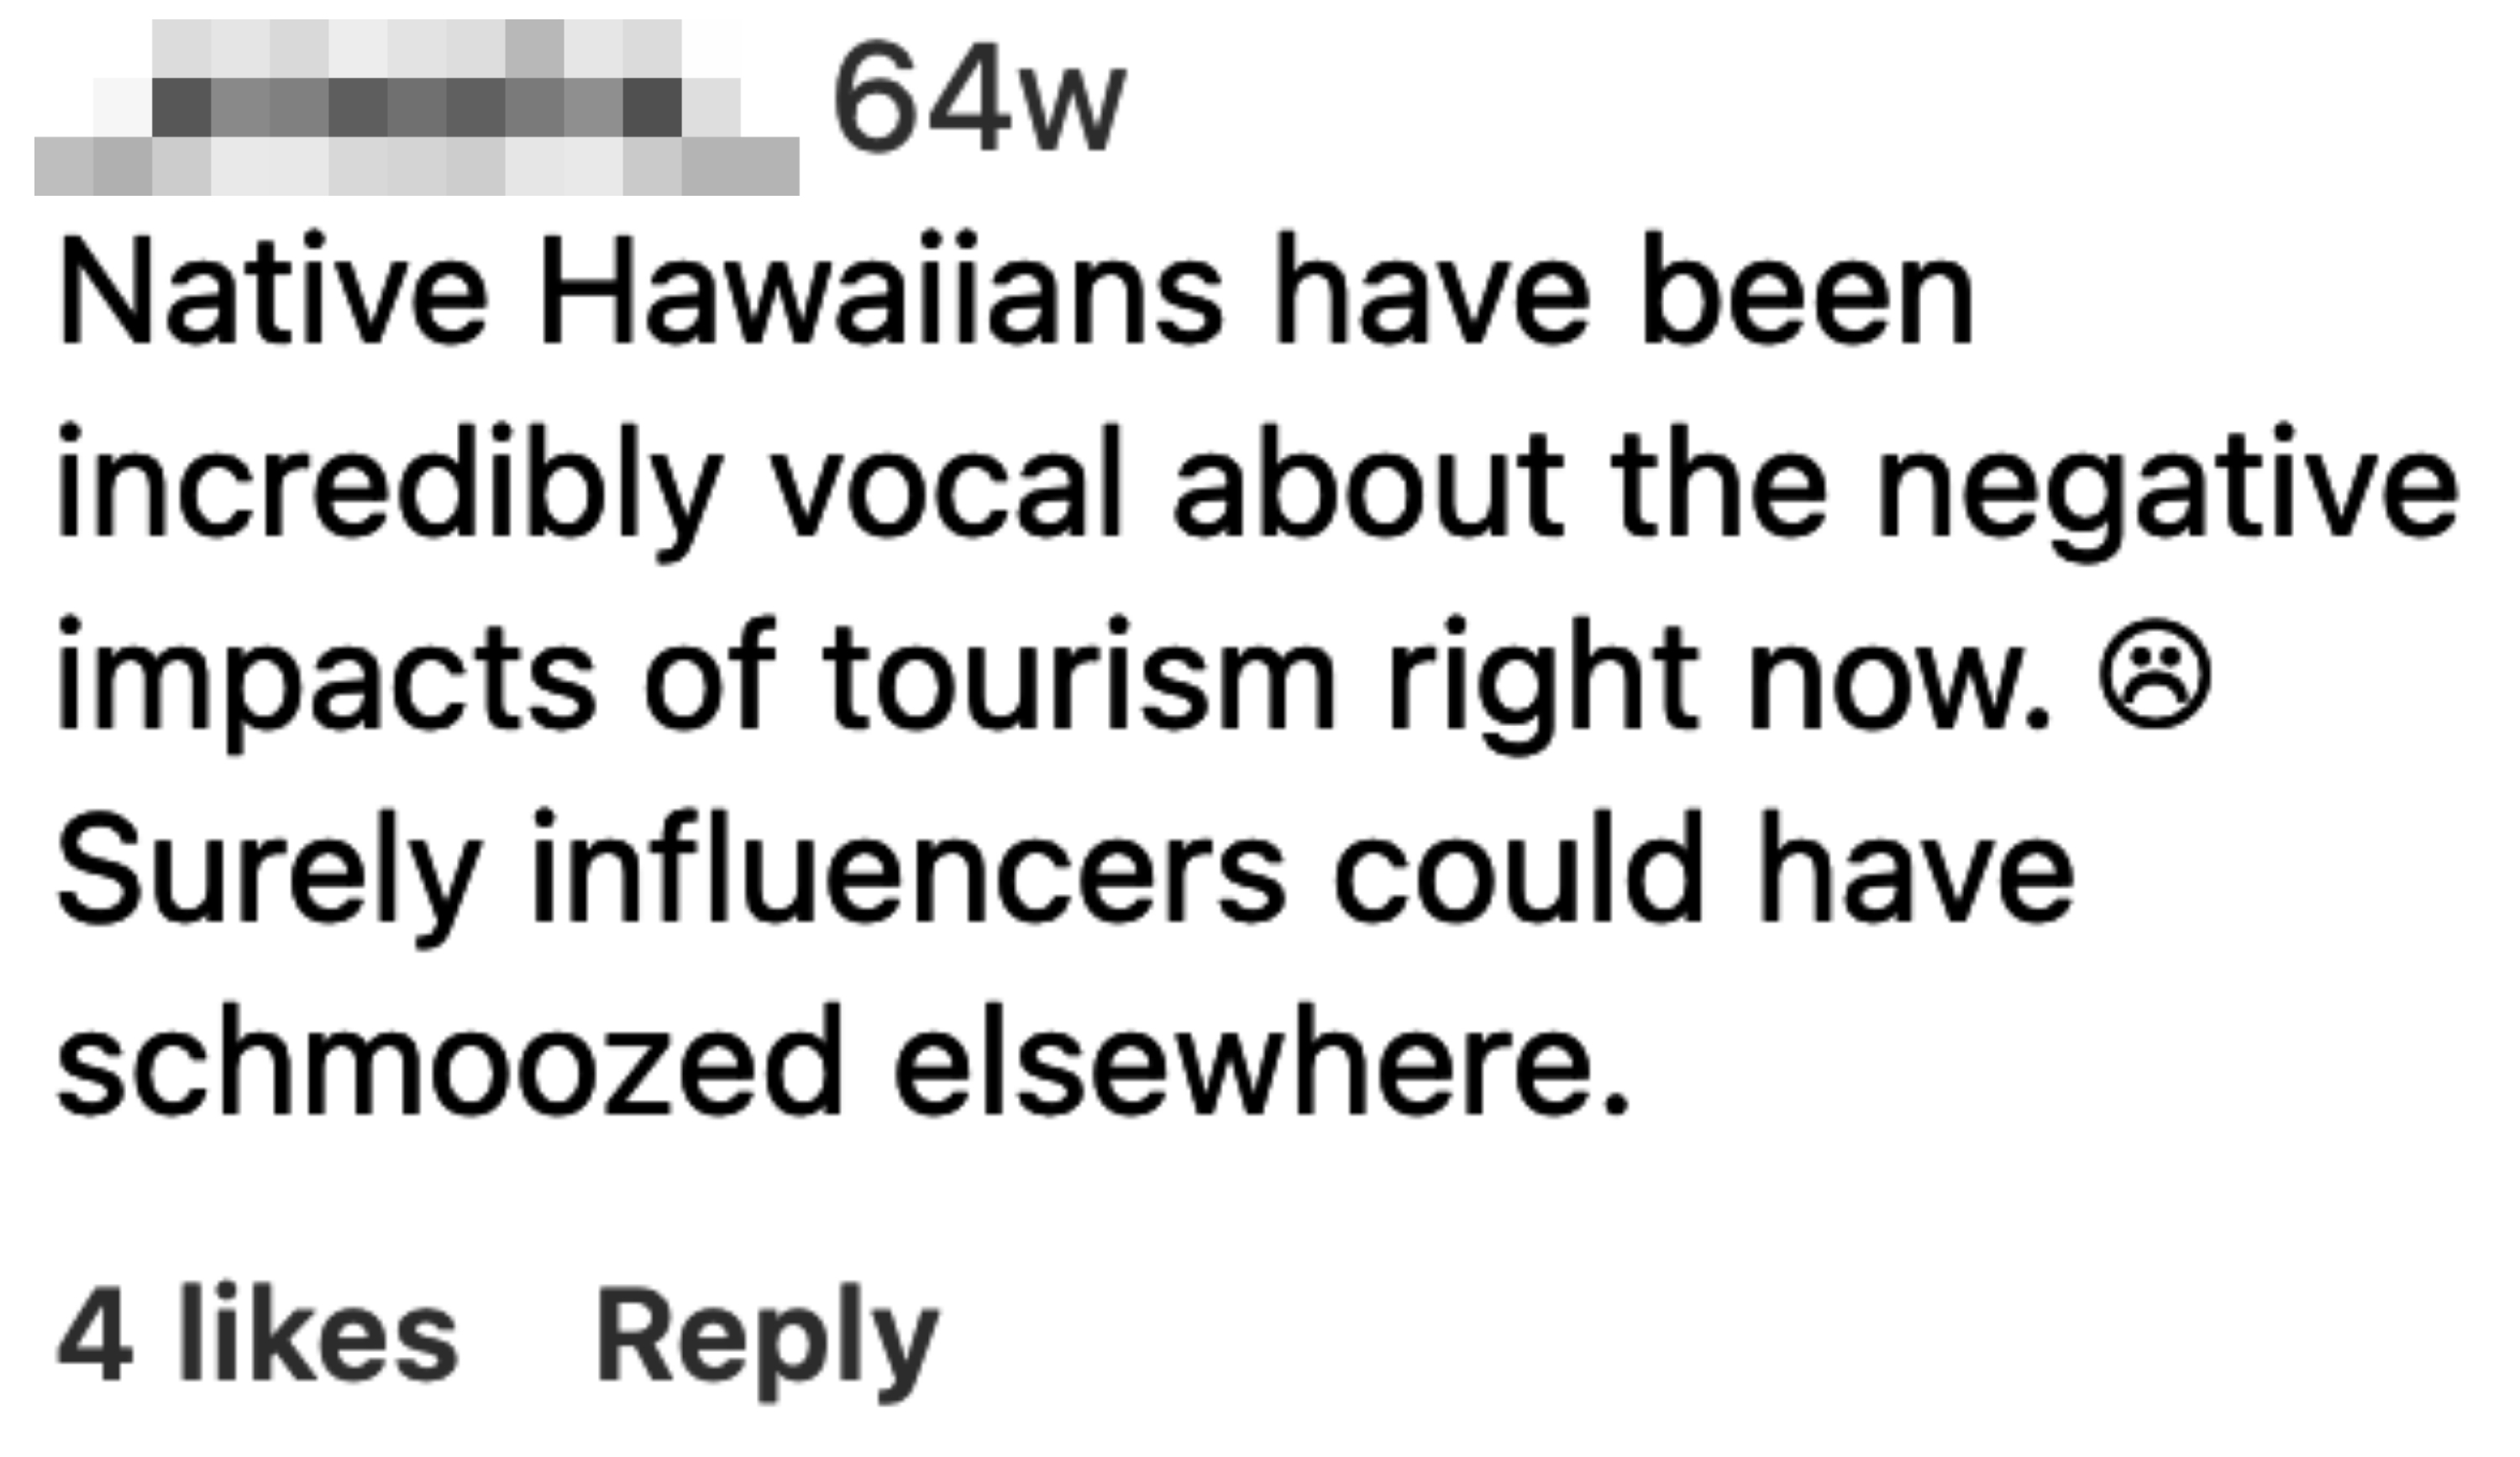 &quot;Native Hawaiians have been incredibly vocal about the negative impacts of tourism right now; surely influencers could have schmoozed elsewhere&quot;